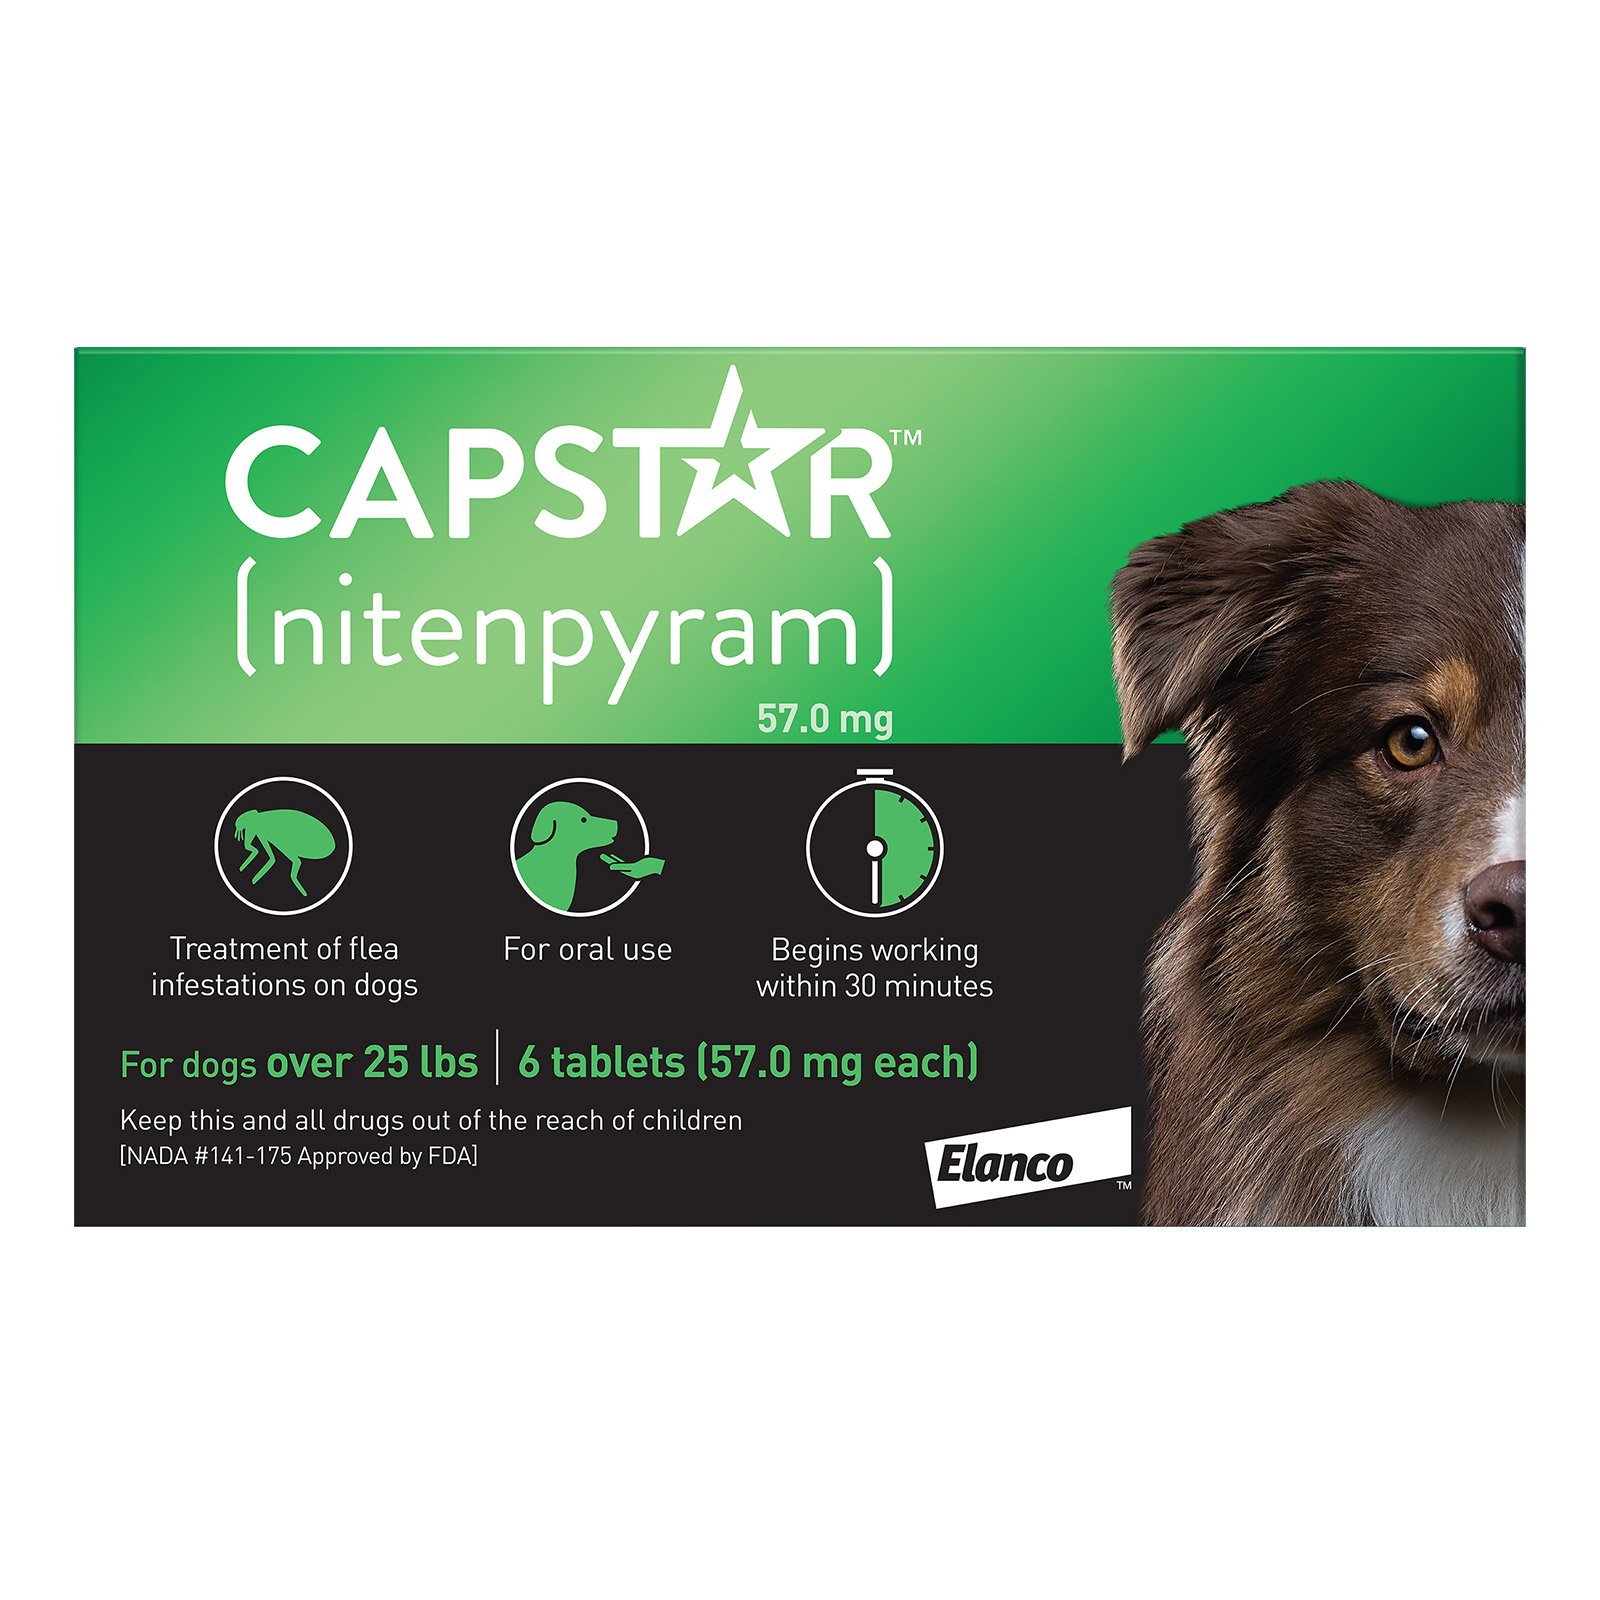 "Capstar Green For Dogs 25.1 - 125 Lbs 6 Tablets"